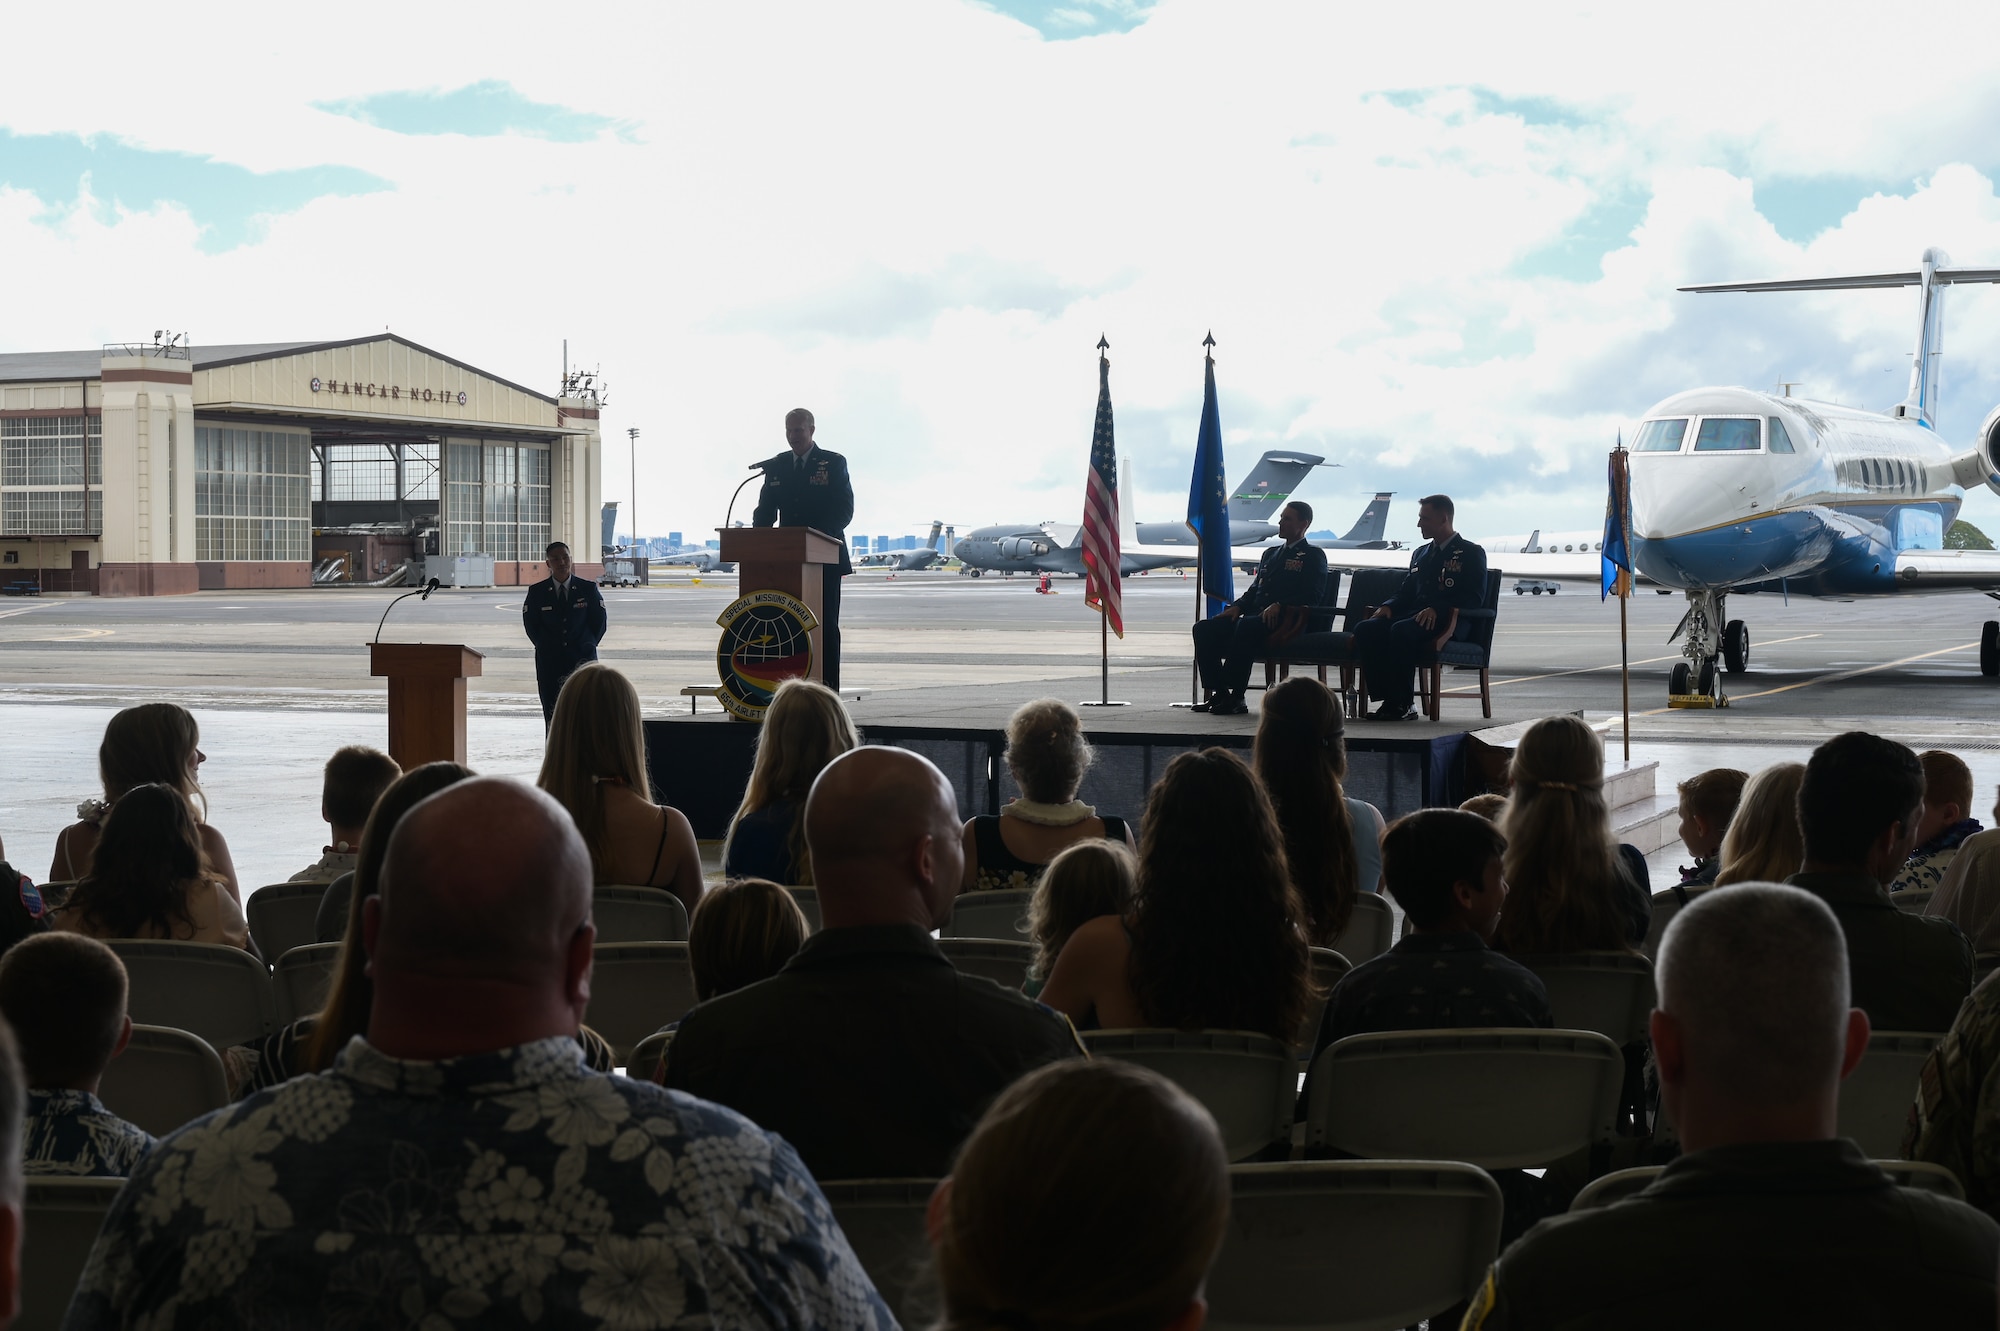 Lt. Col. Daniel Hellinger, 65th Airlift Squadron commander, gives a speech during a change of command ceremony at Joint Base Pearl Harbor-Hickam, Hawaii, June 24, 2022. Hellinger is taking command after serving as the 15th Wing Chief of Safety from June 2021 to June 2022. (U.S. Air Force photo by Staff Sgt. Alan Ricker)